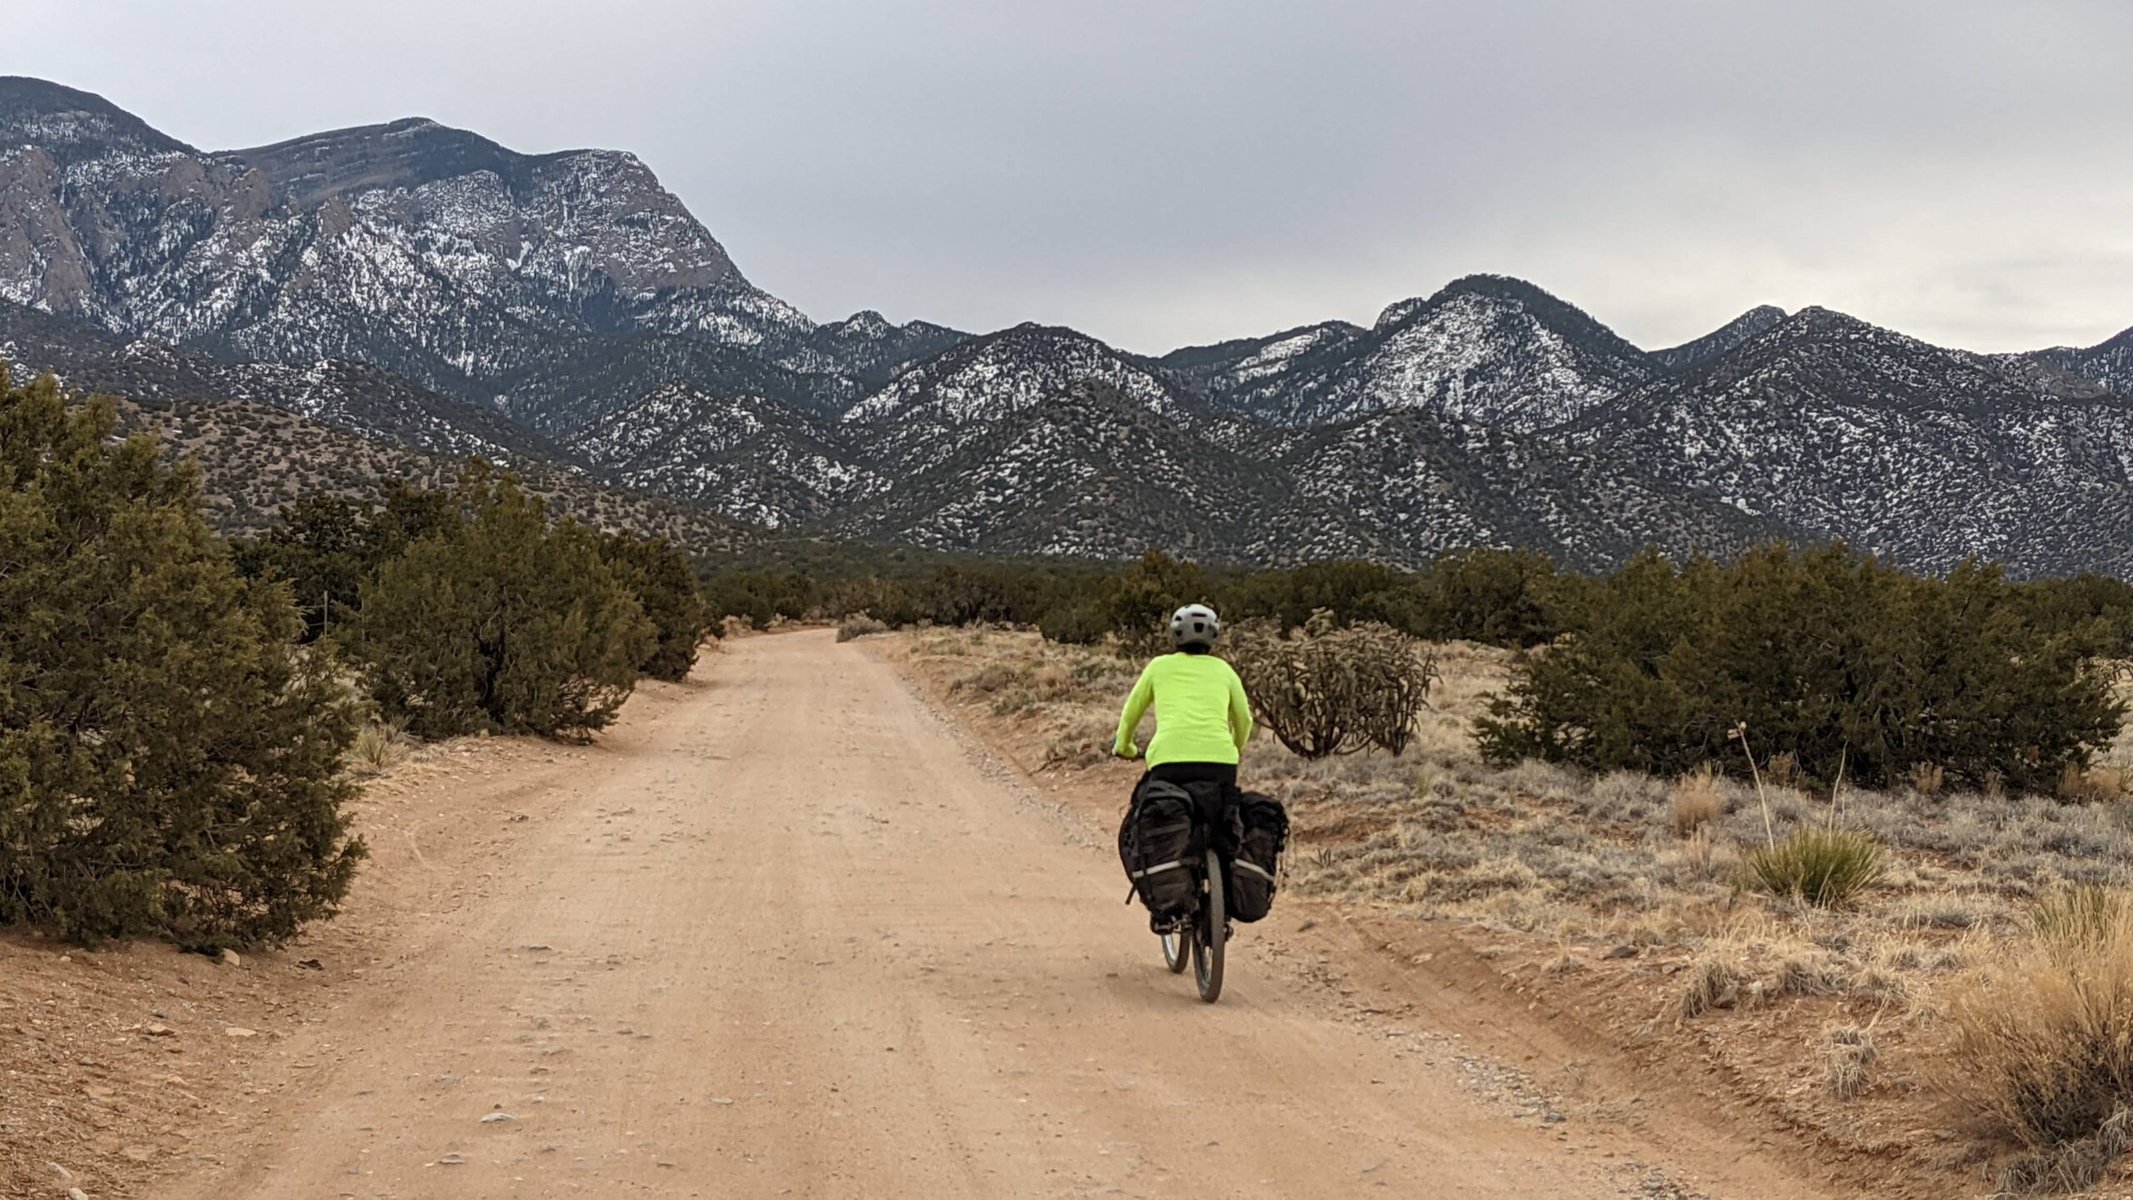 A cyclist on a dirt road in the Sandia Mountains.